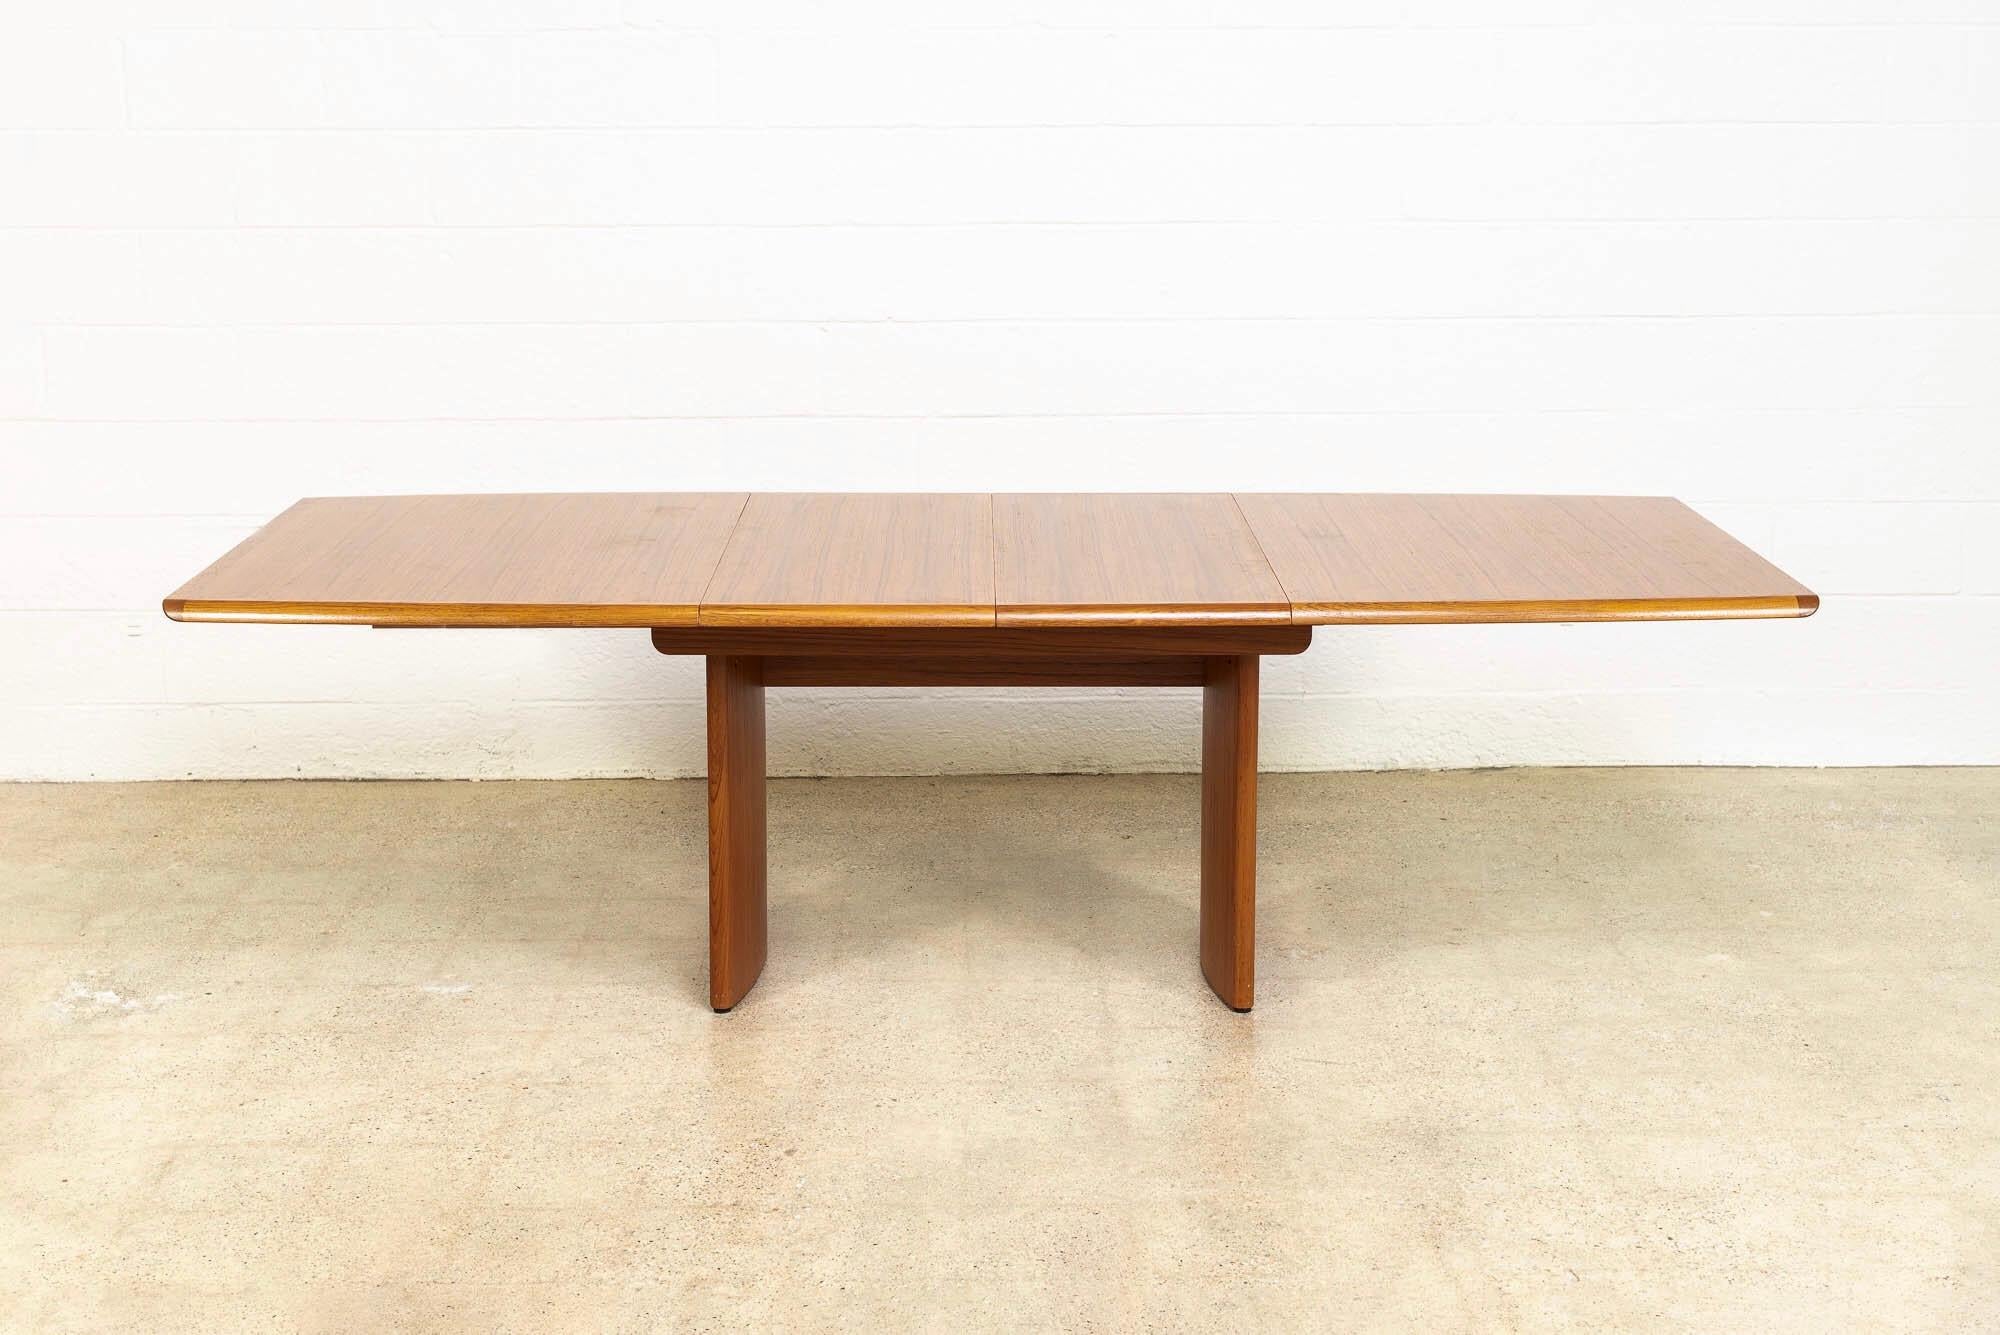 Mid-20th Century Vintage Danish Modern Teak Wood Extendable Dining Table with Two Leaves, 1960s For Sale